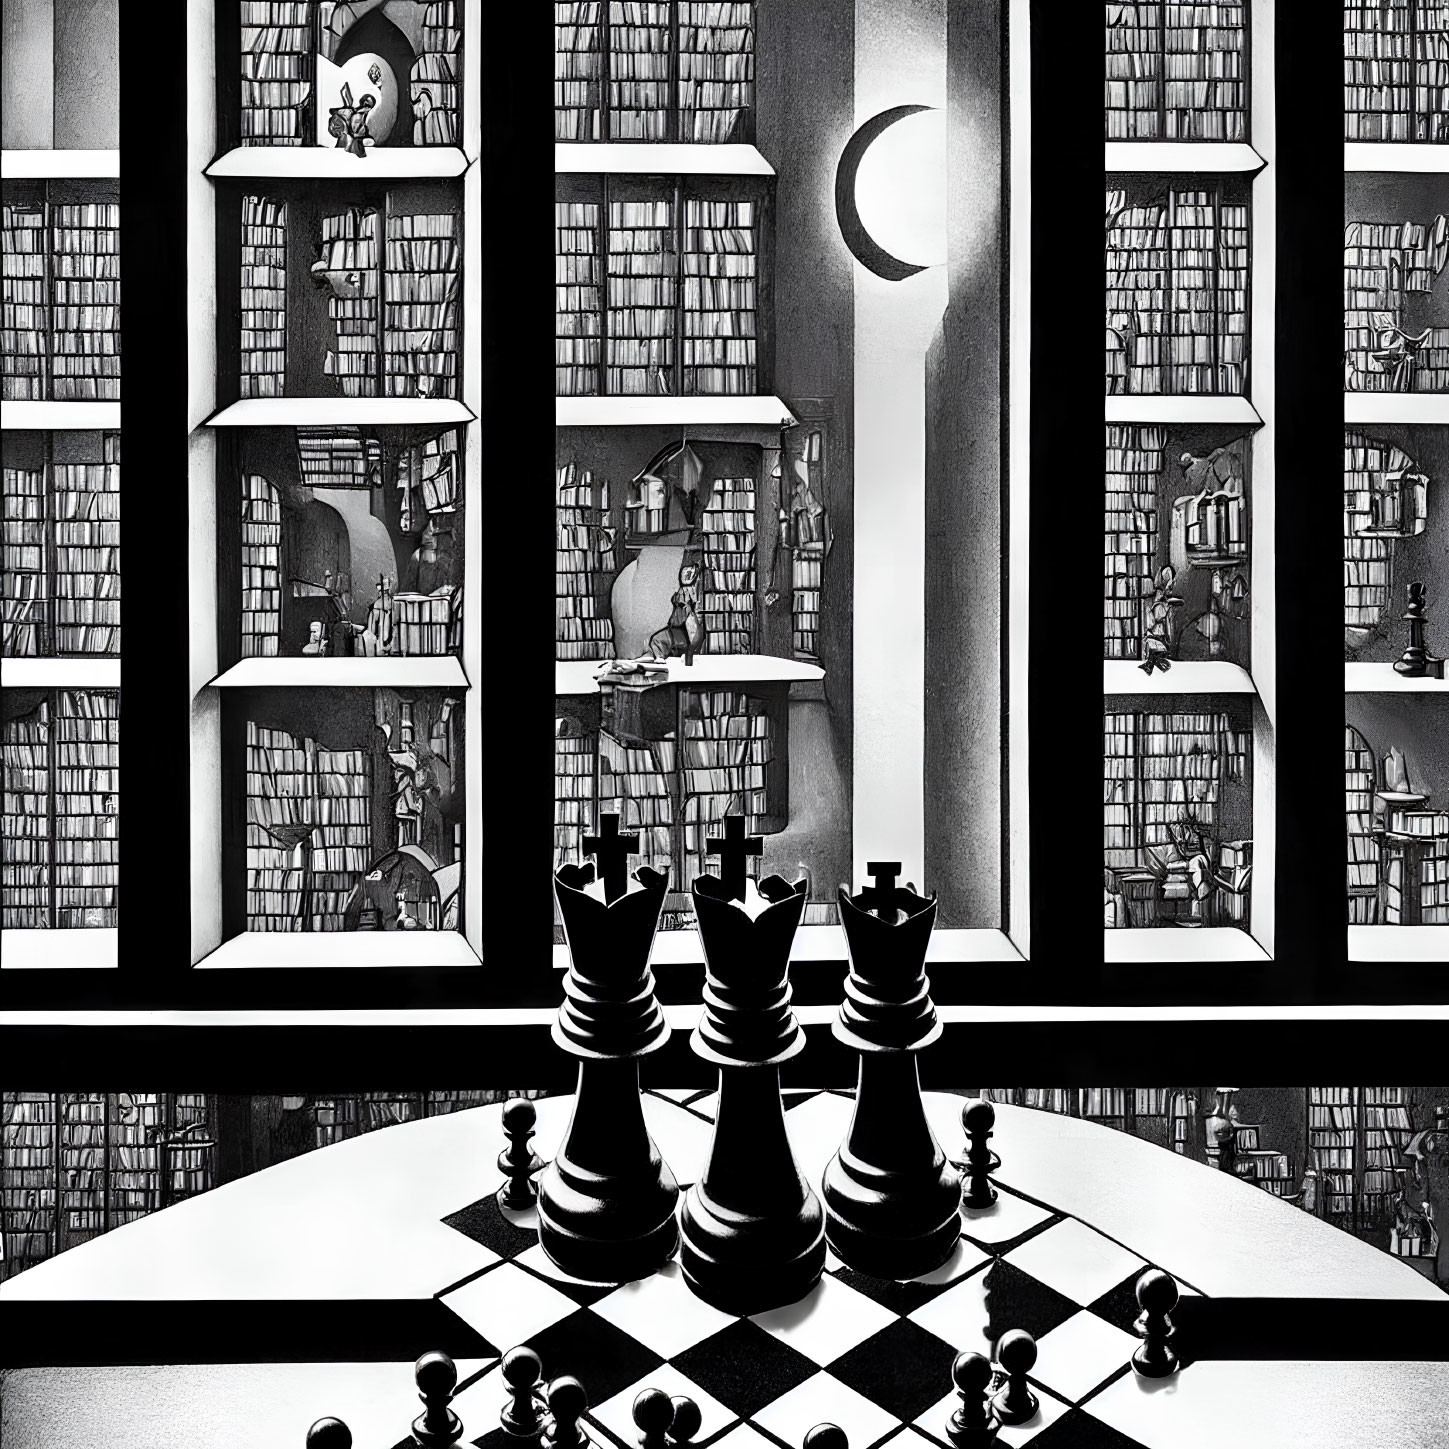 Surreal black and white library illustration with chess pieces and books